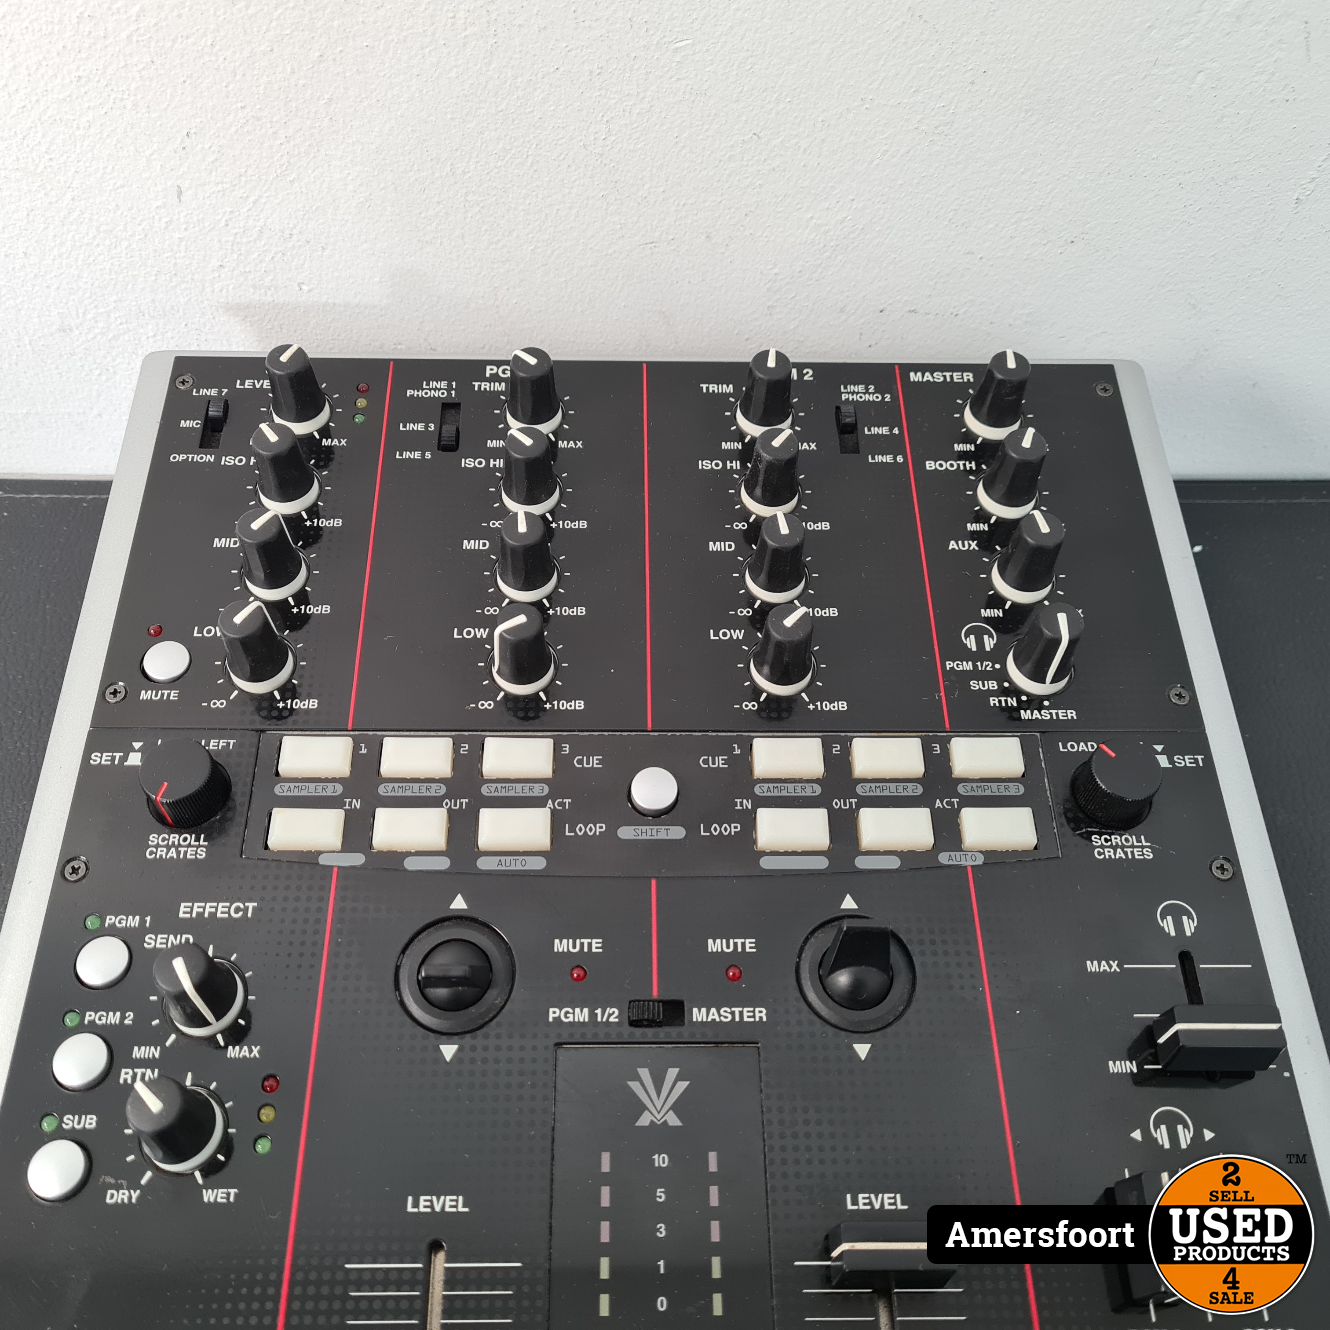 Vestax PMC-05 Pro IV | 2-Kanaals Battle Mixer - Used Products